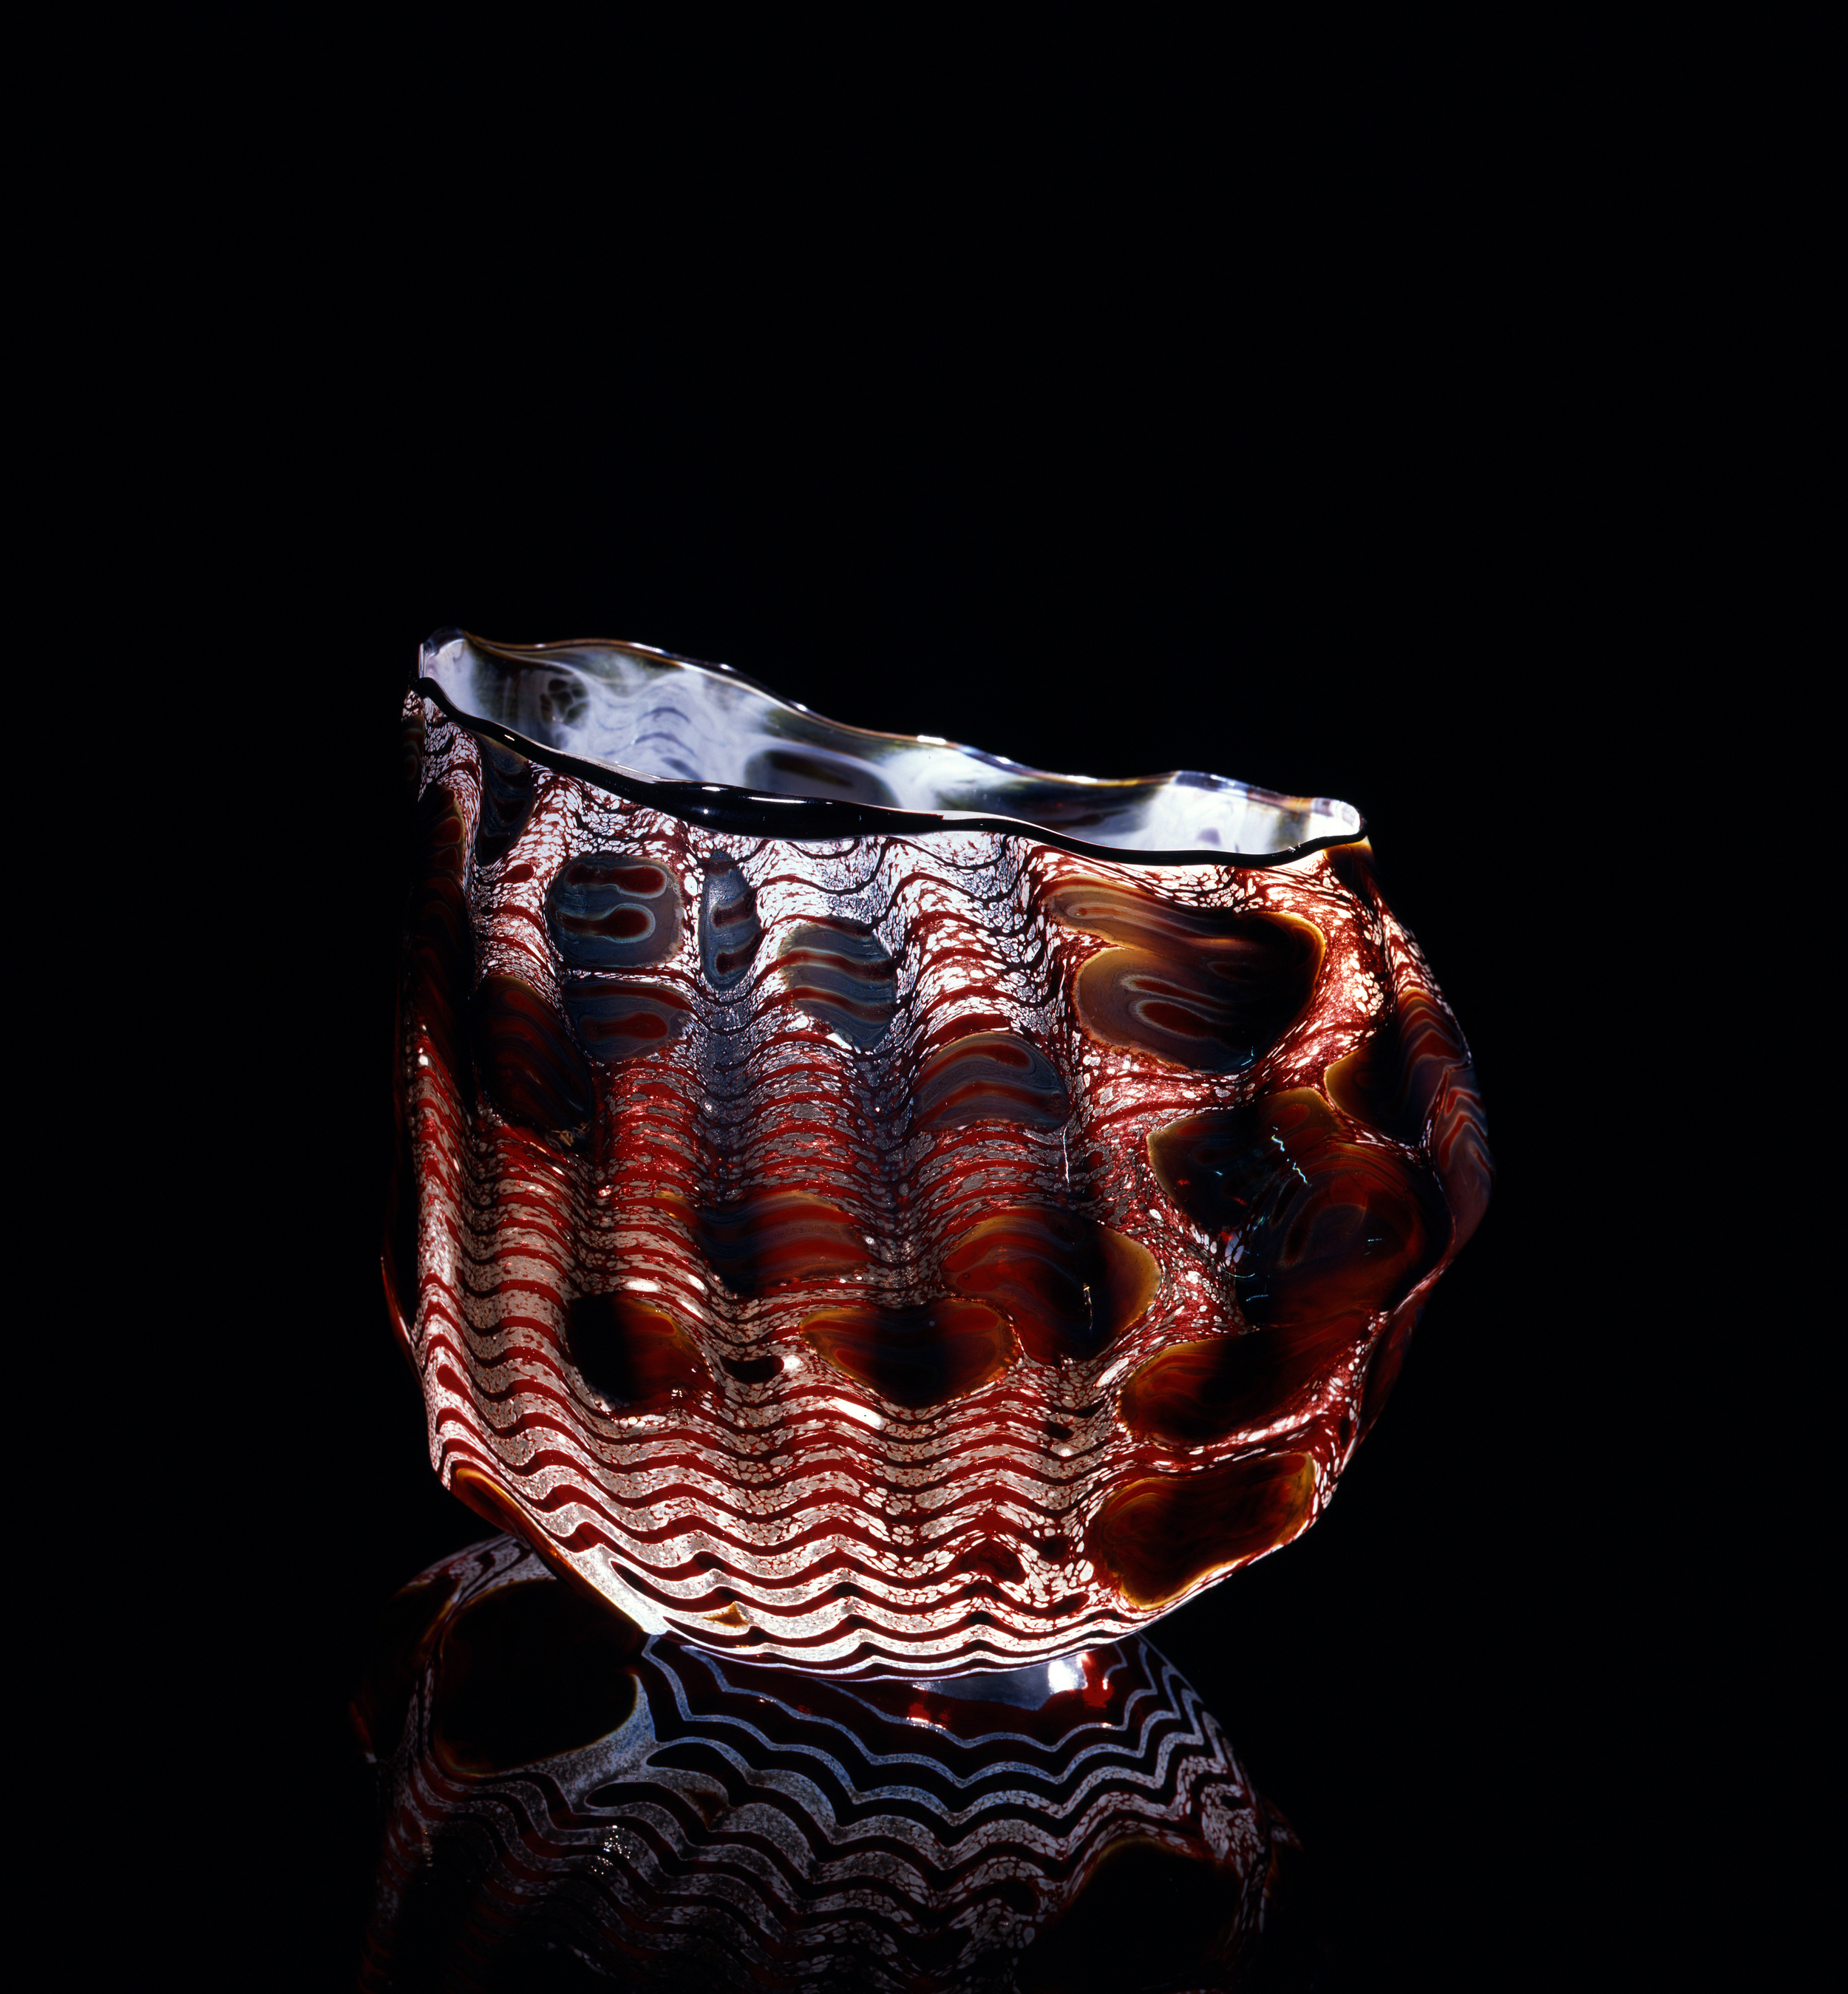  Dale Chihuly,&nbsp; Birch Macchia with Raw Umber Lip Wrap&nbsp; (1981, glass,7 x 9 x 7&nbsp;inches), DC.76 